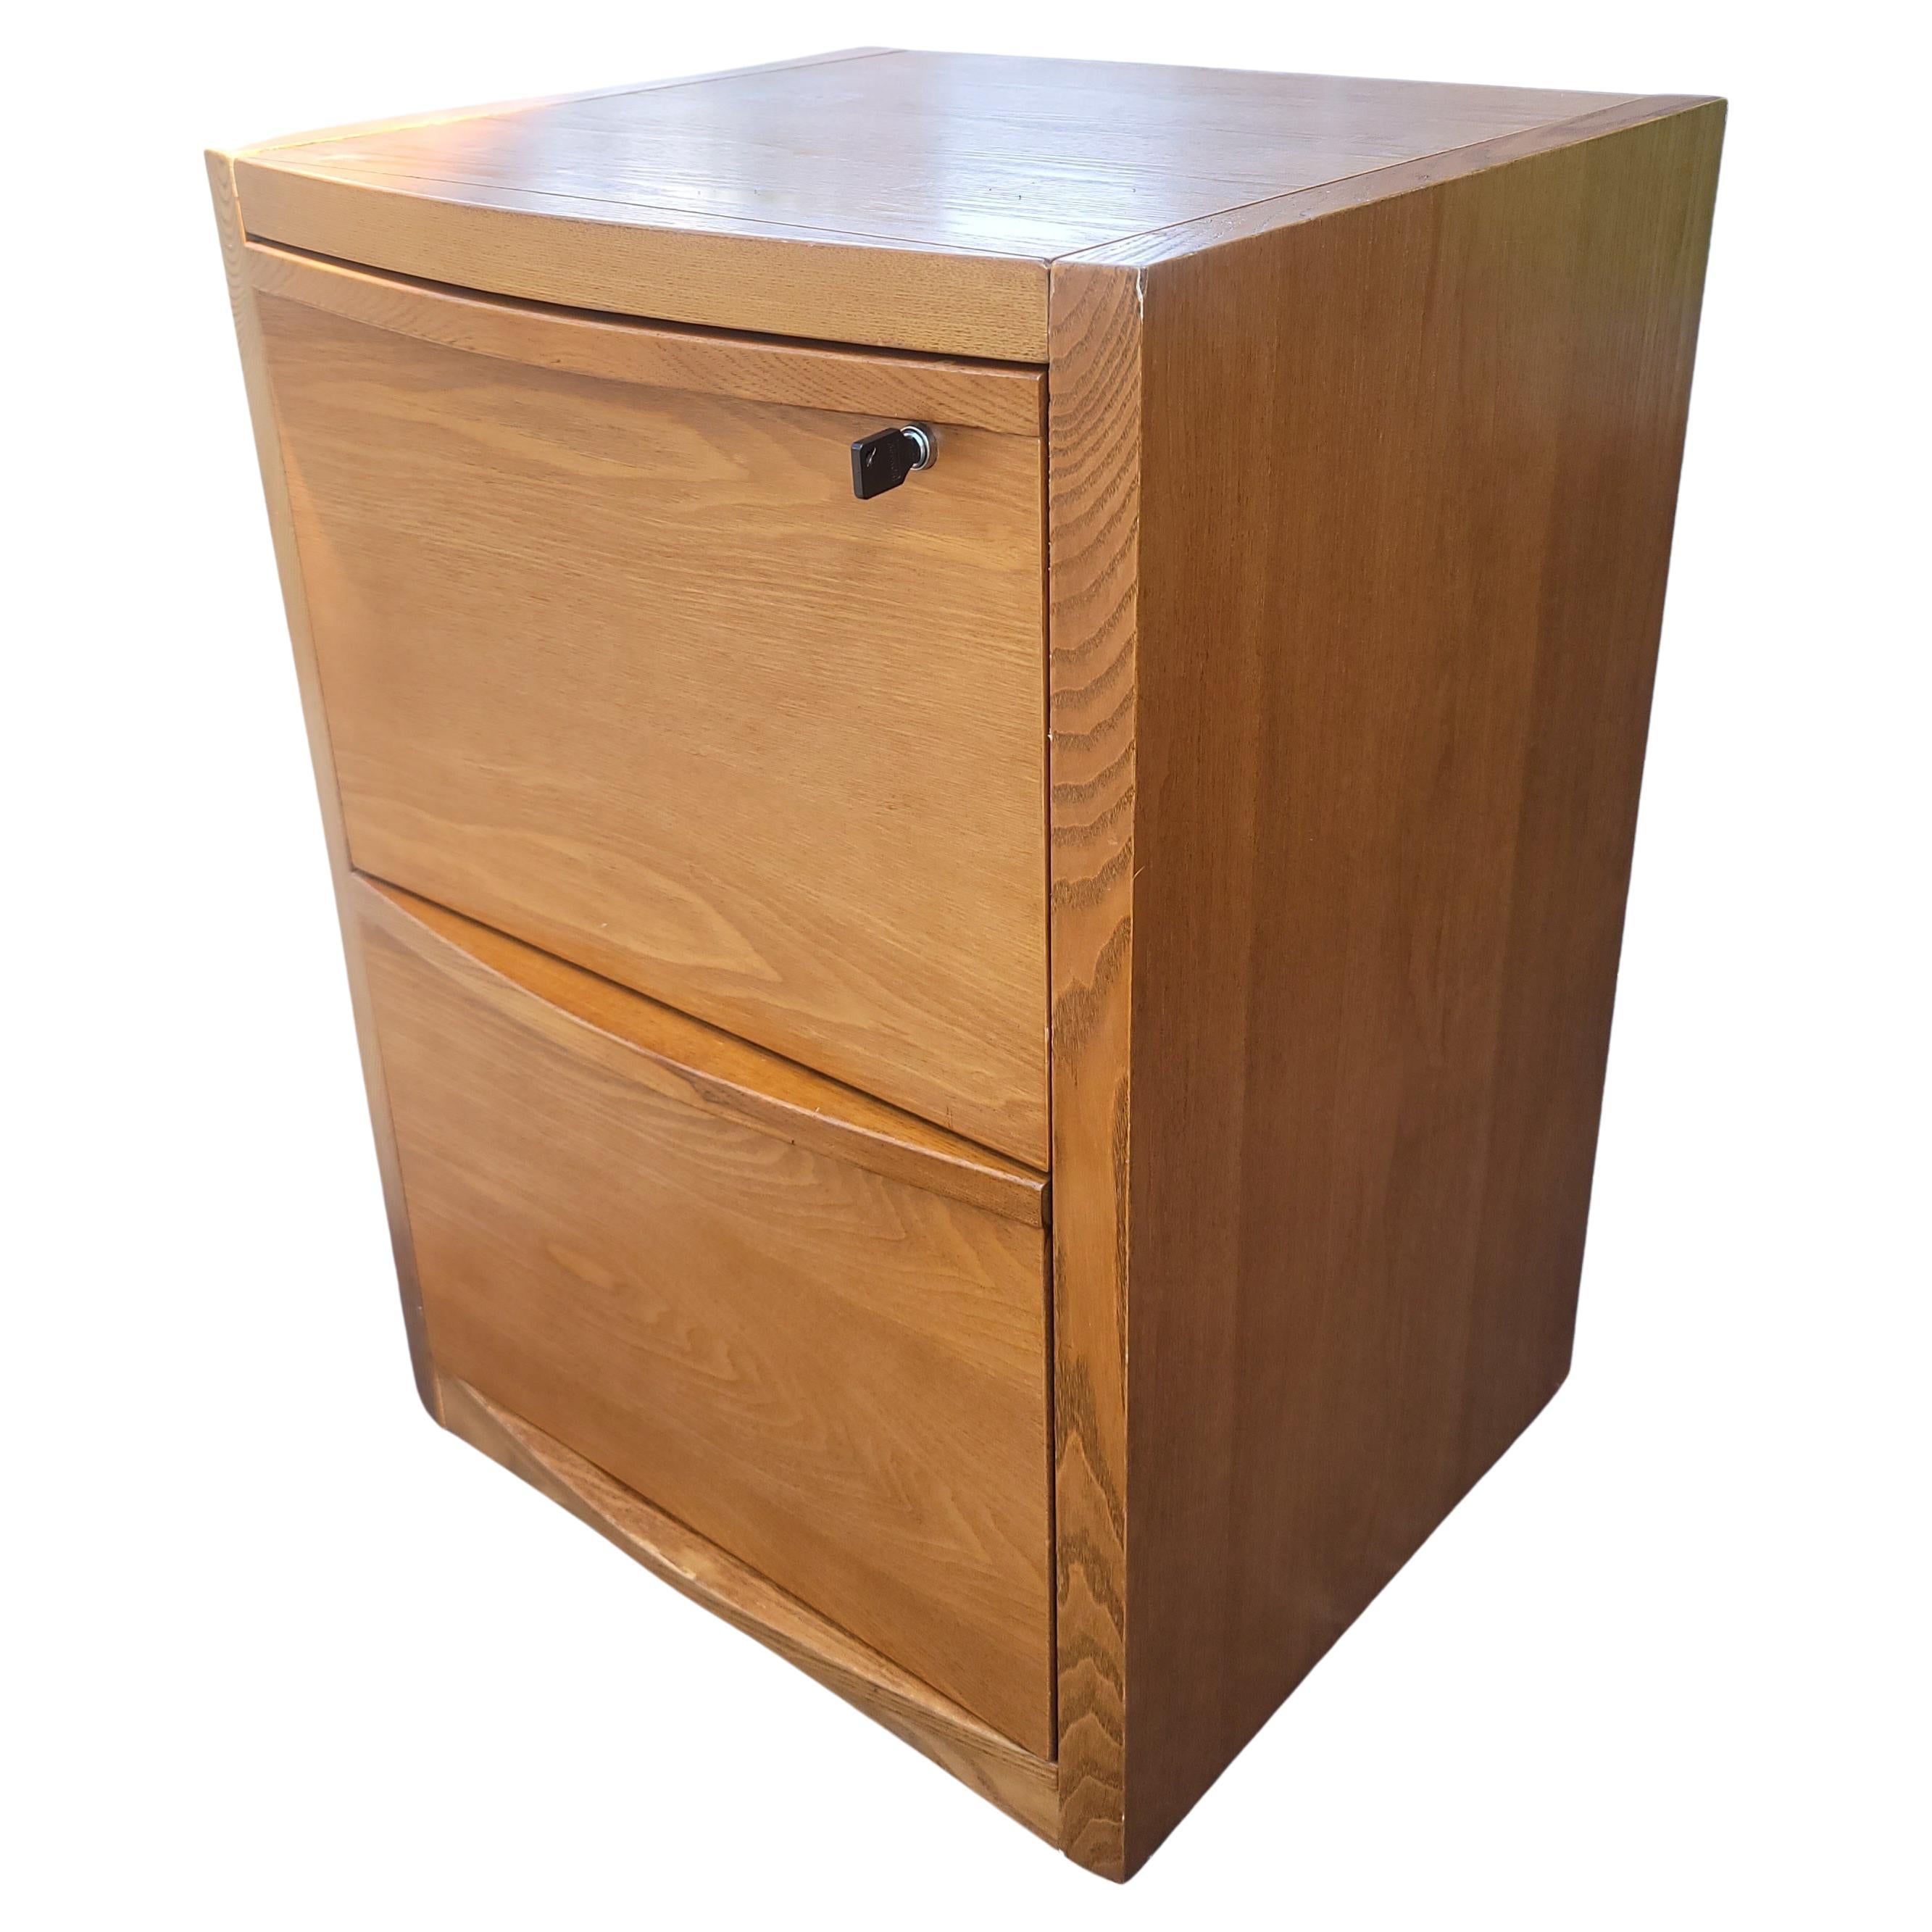 Solid oak two-drawer filing cabinet in great condition with key. Measures 19.5